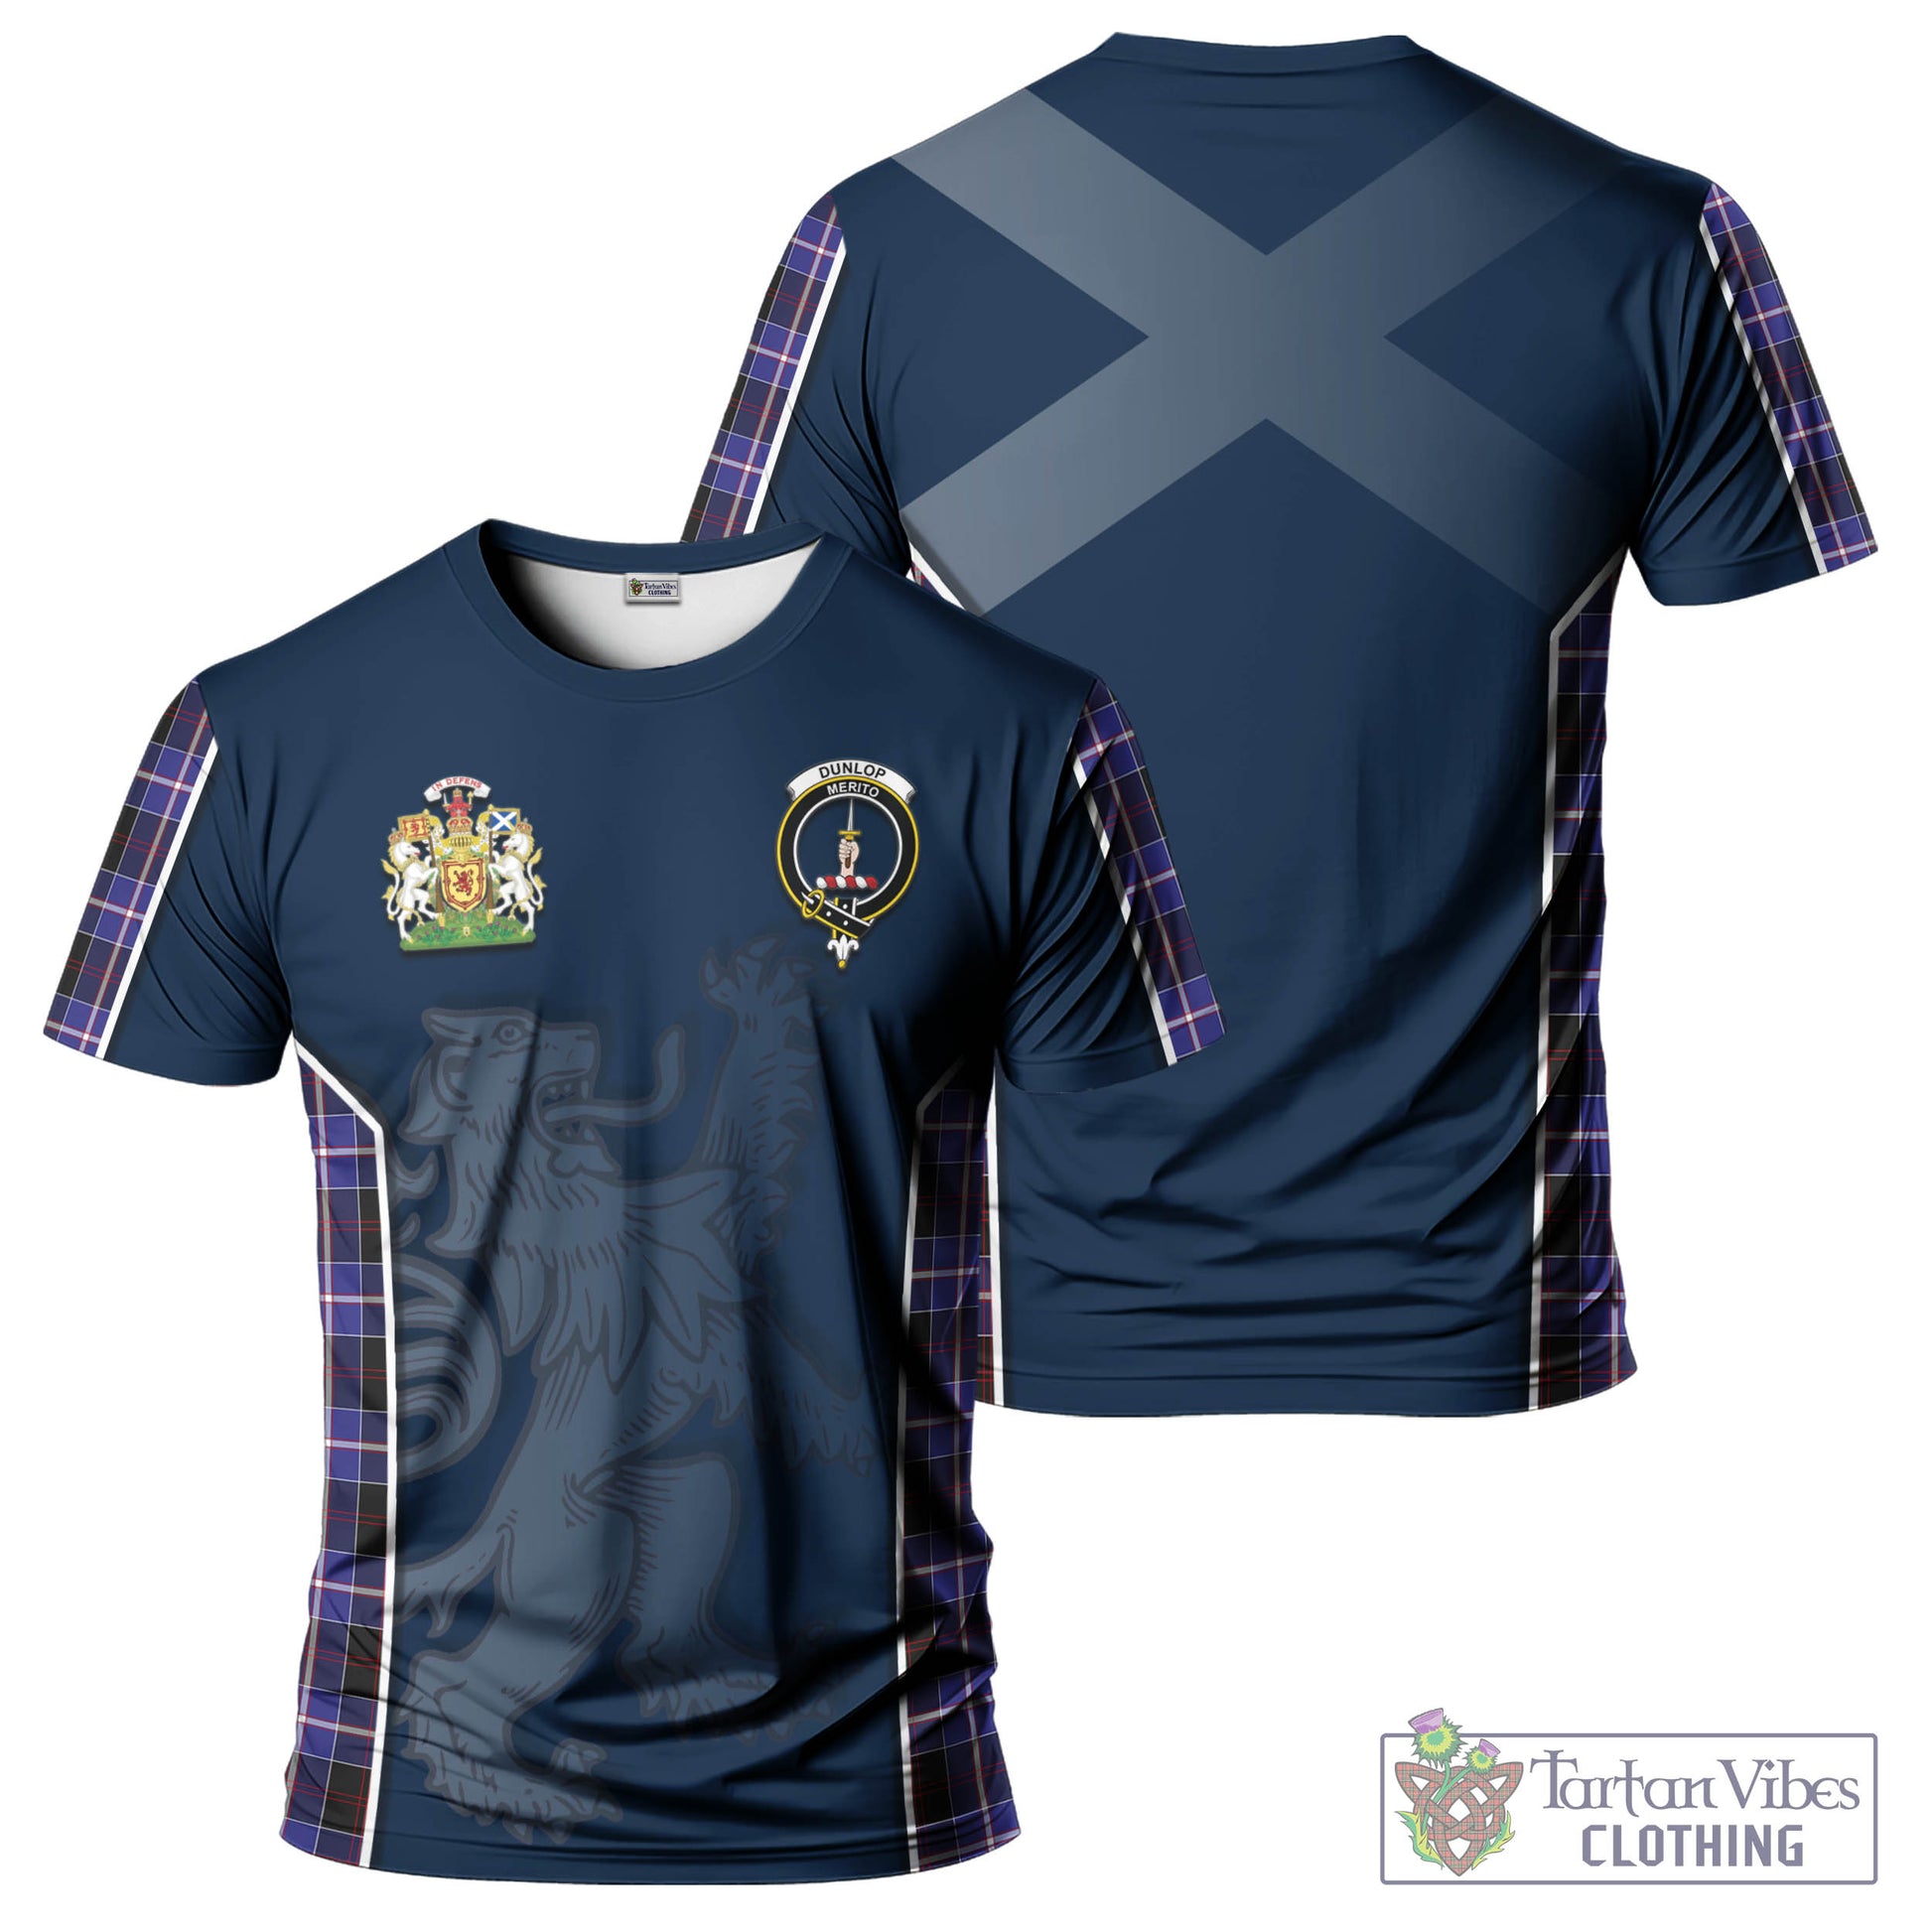 Tartan Vibes Clothing Dunlop Modern Tartan T-Shirt with Family Crest and Lion Rampant Vibes Sport Style